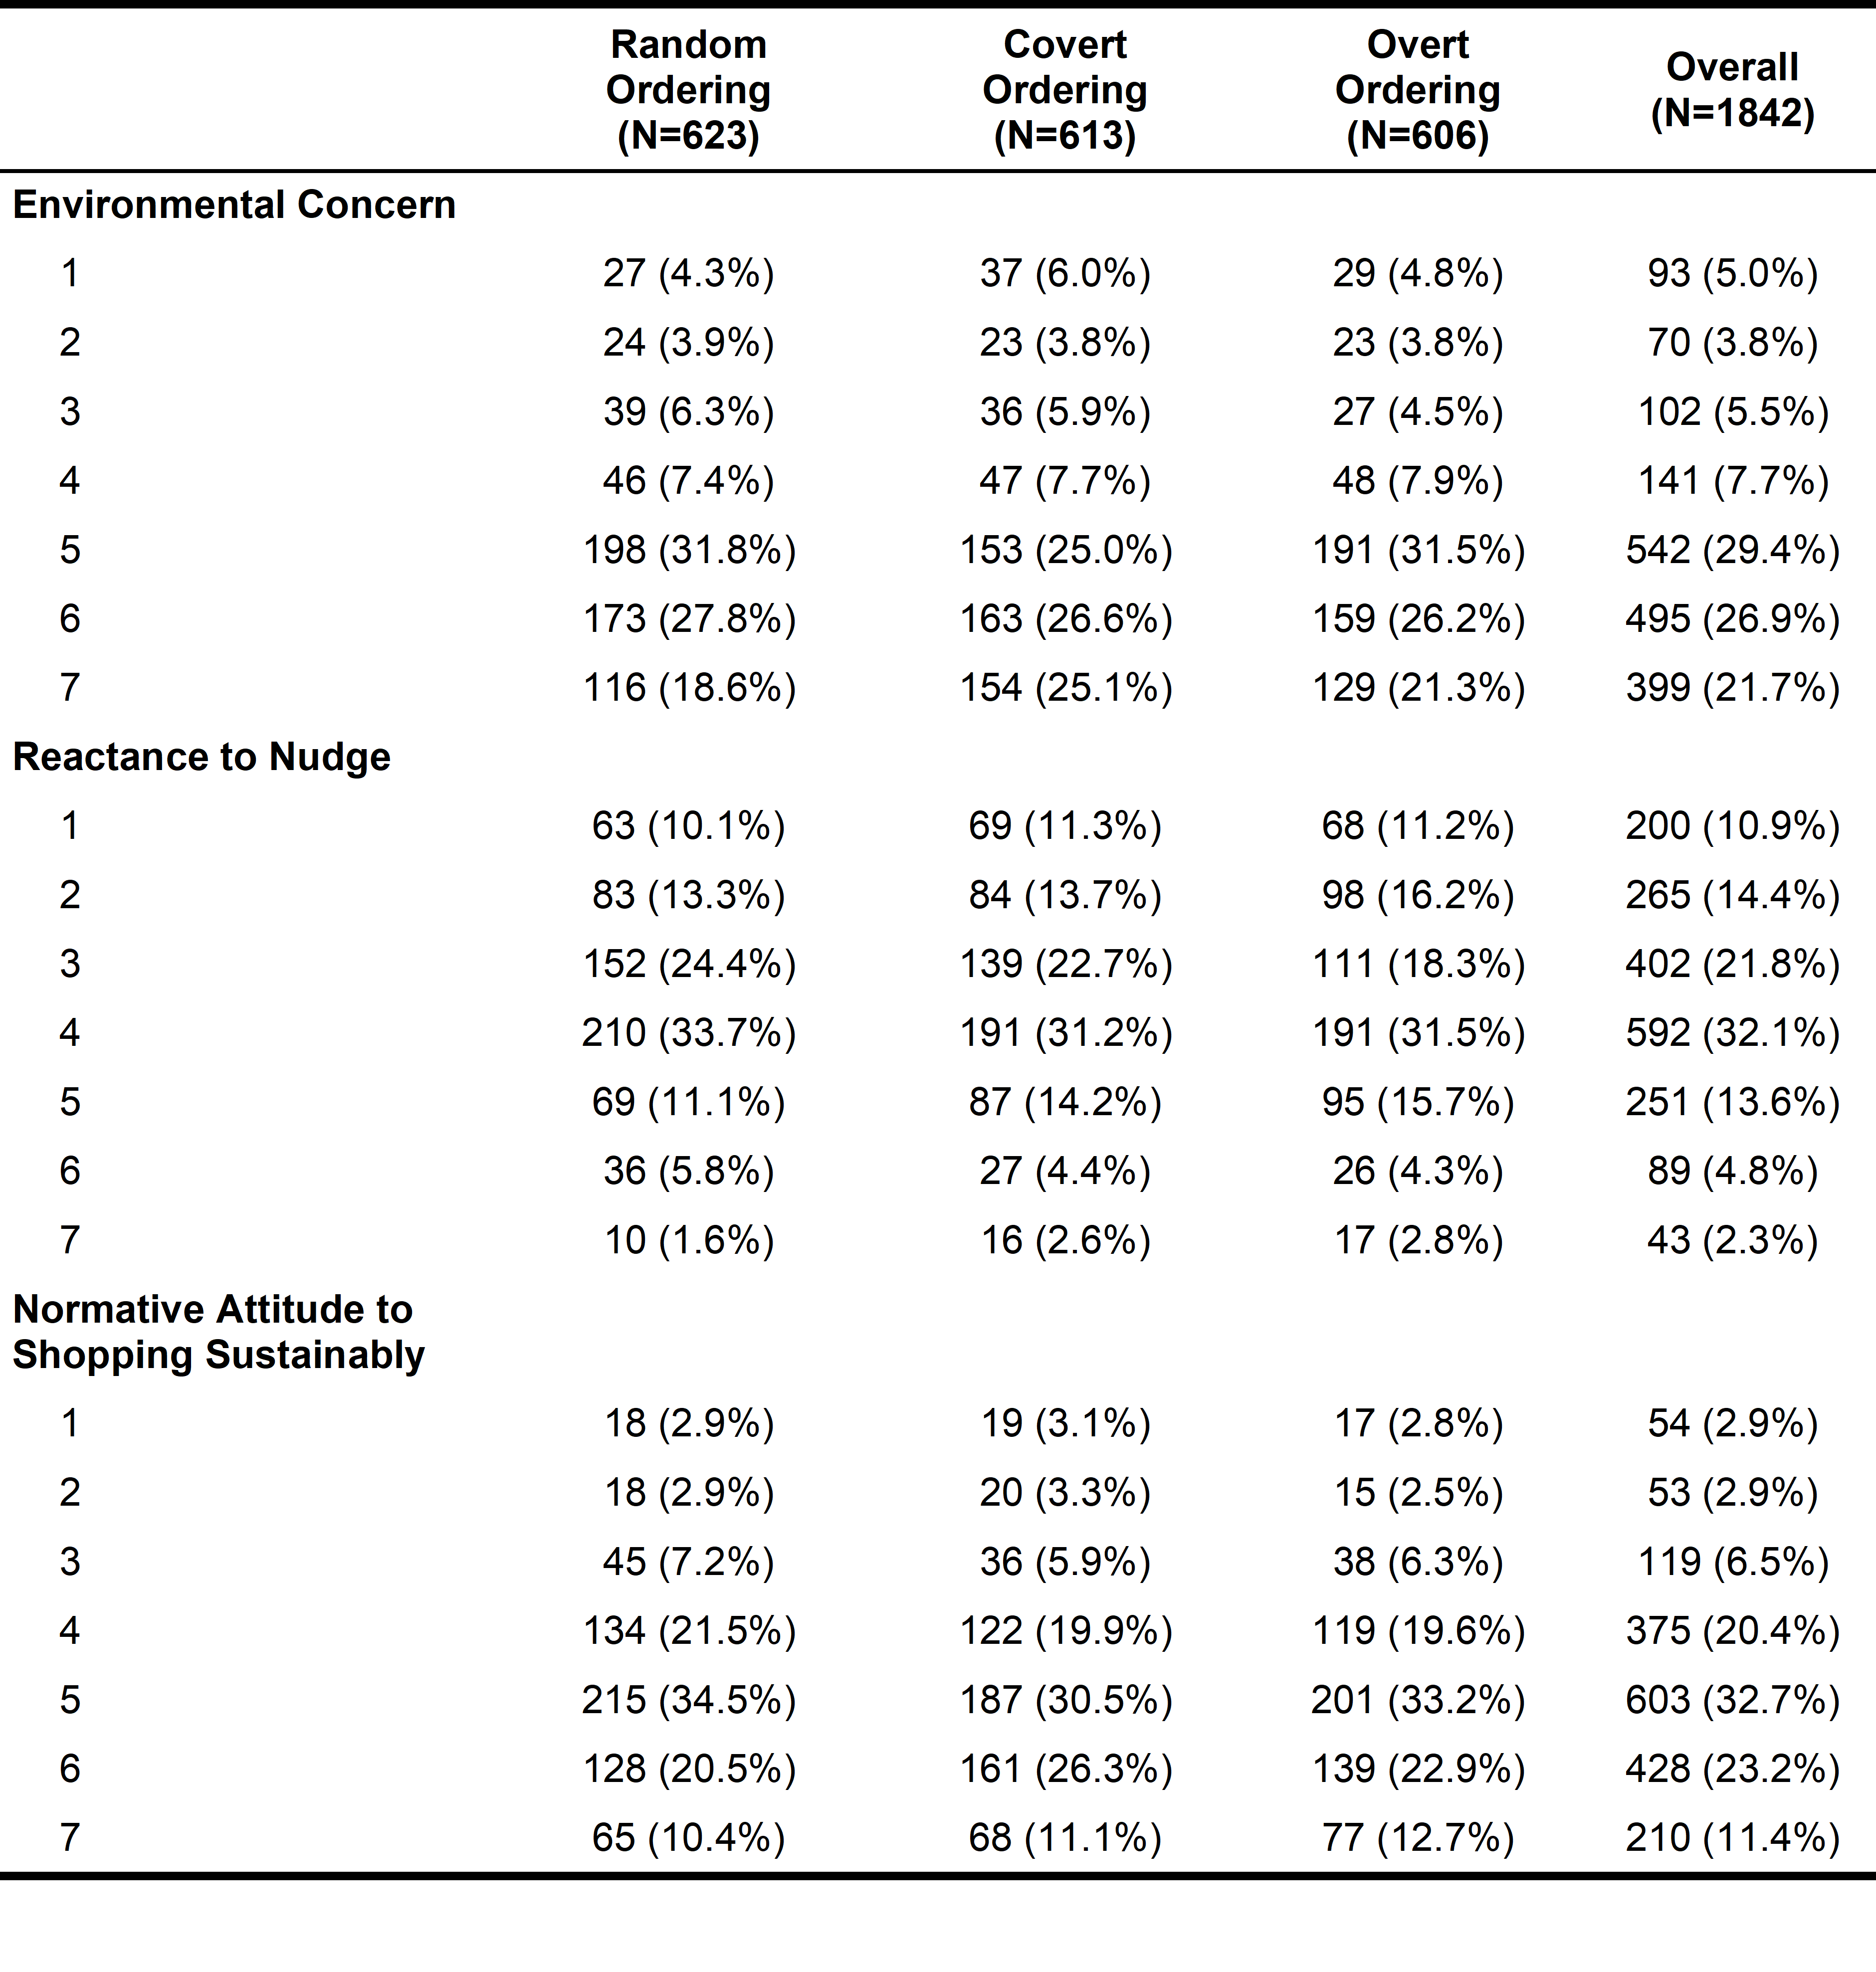 The first column shows attitudinal scores for 'environmental concern' from the third to ninth row, 'reactance to nudge' from the eleventh to seventeenth row, and 'normative attitude to shopping sustainably' from the nineteenth to twenty-fifth row.   The second column shows the number and percentage of responses in the random ordering condition, the third column shows the number and percentage of responses in the covert ordering condition, the fourth column shows the number and percentage of responses in the